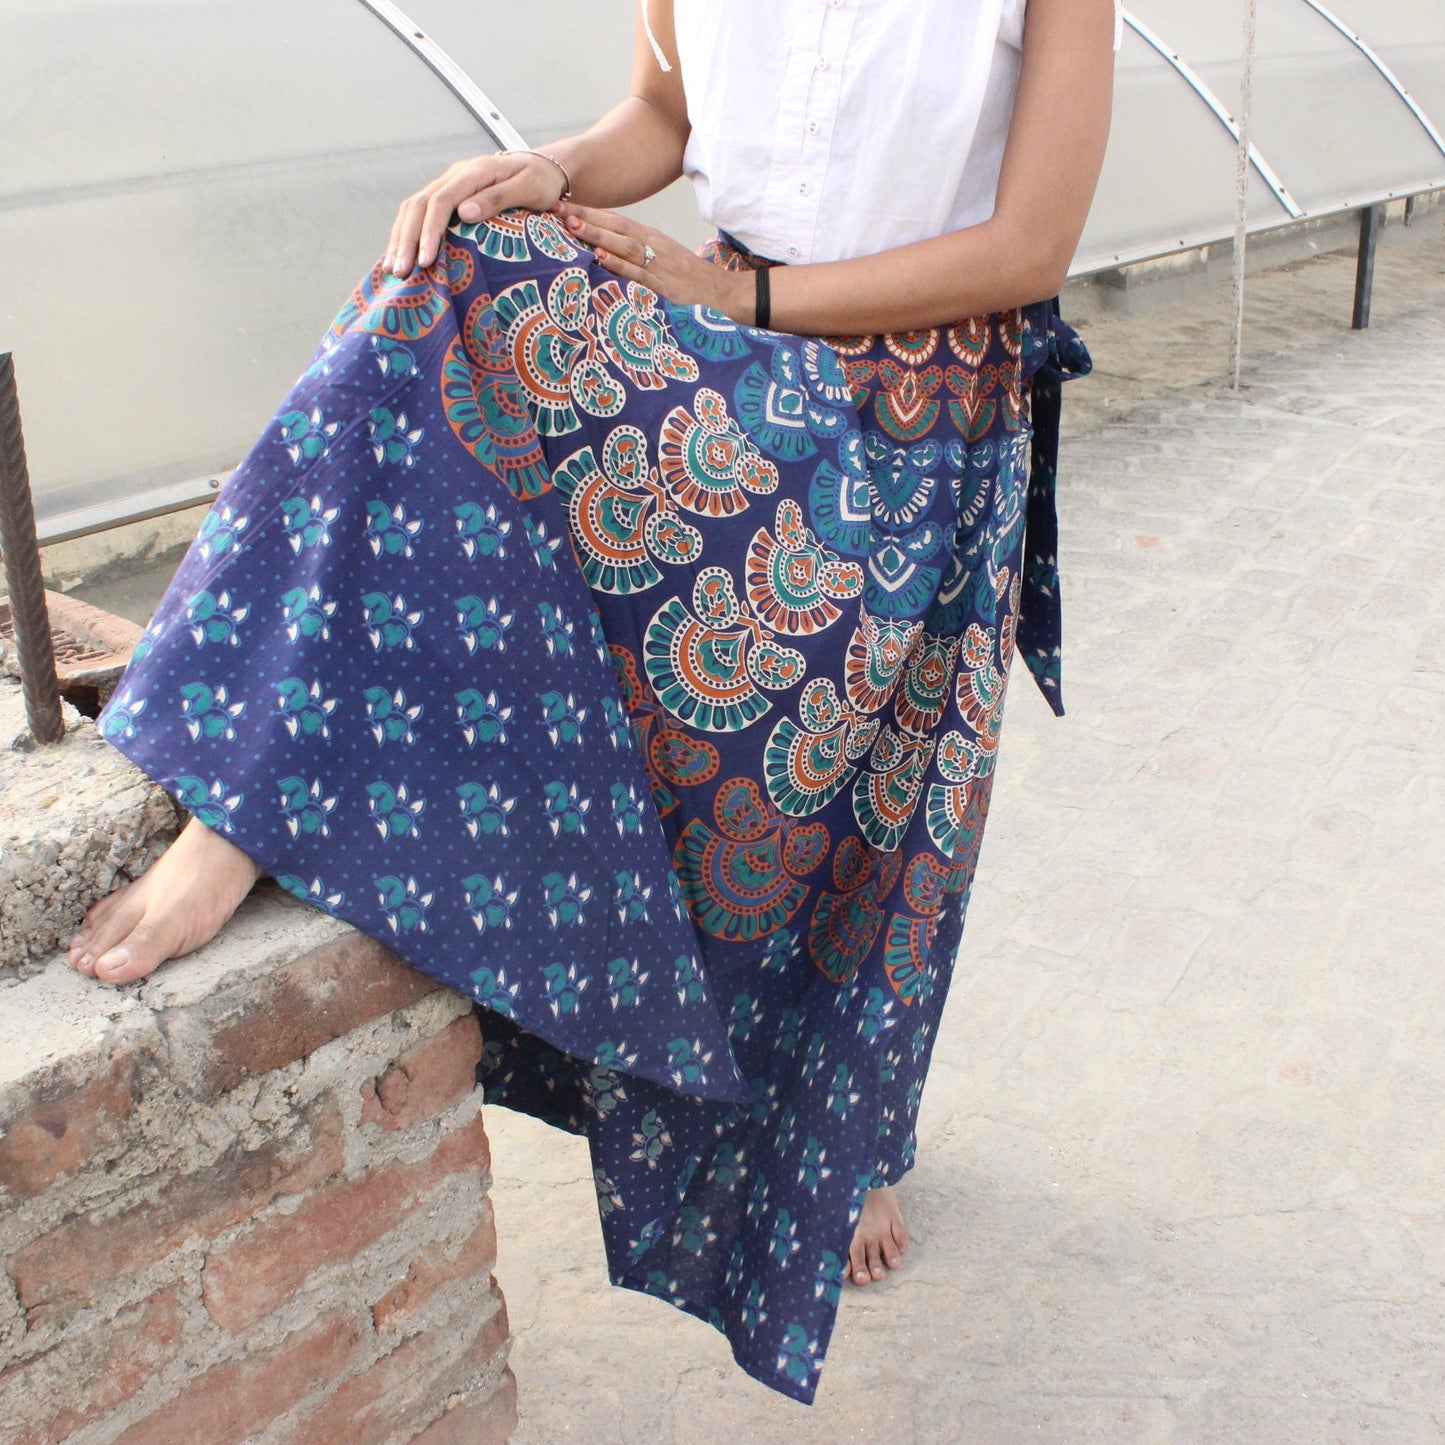 Bohemian Fairy Skirt: Embrace Your Inner Hippie with this Whimsical Festival Skirt for a Dreamy Home Outfit, Clothing skirts, gypsy skirt